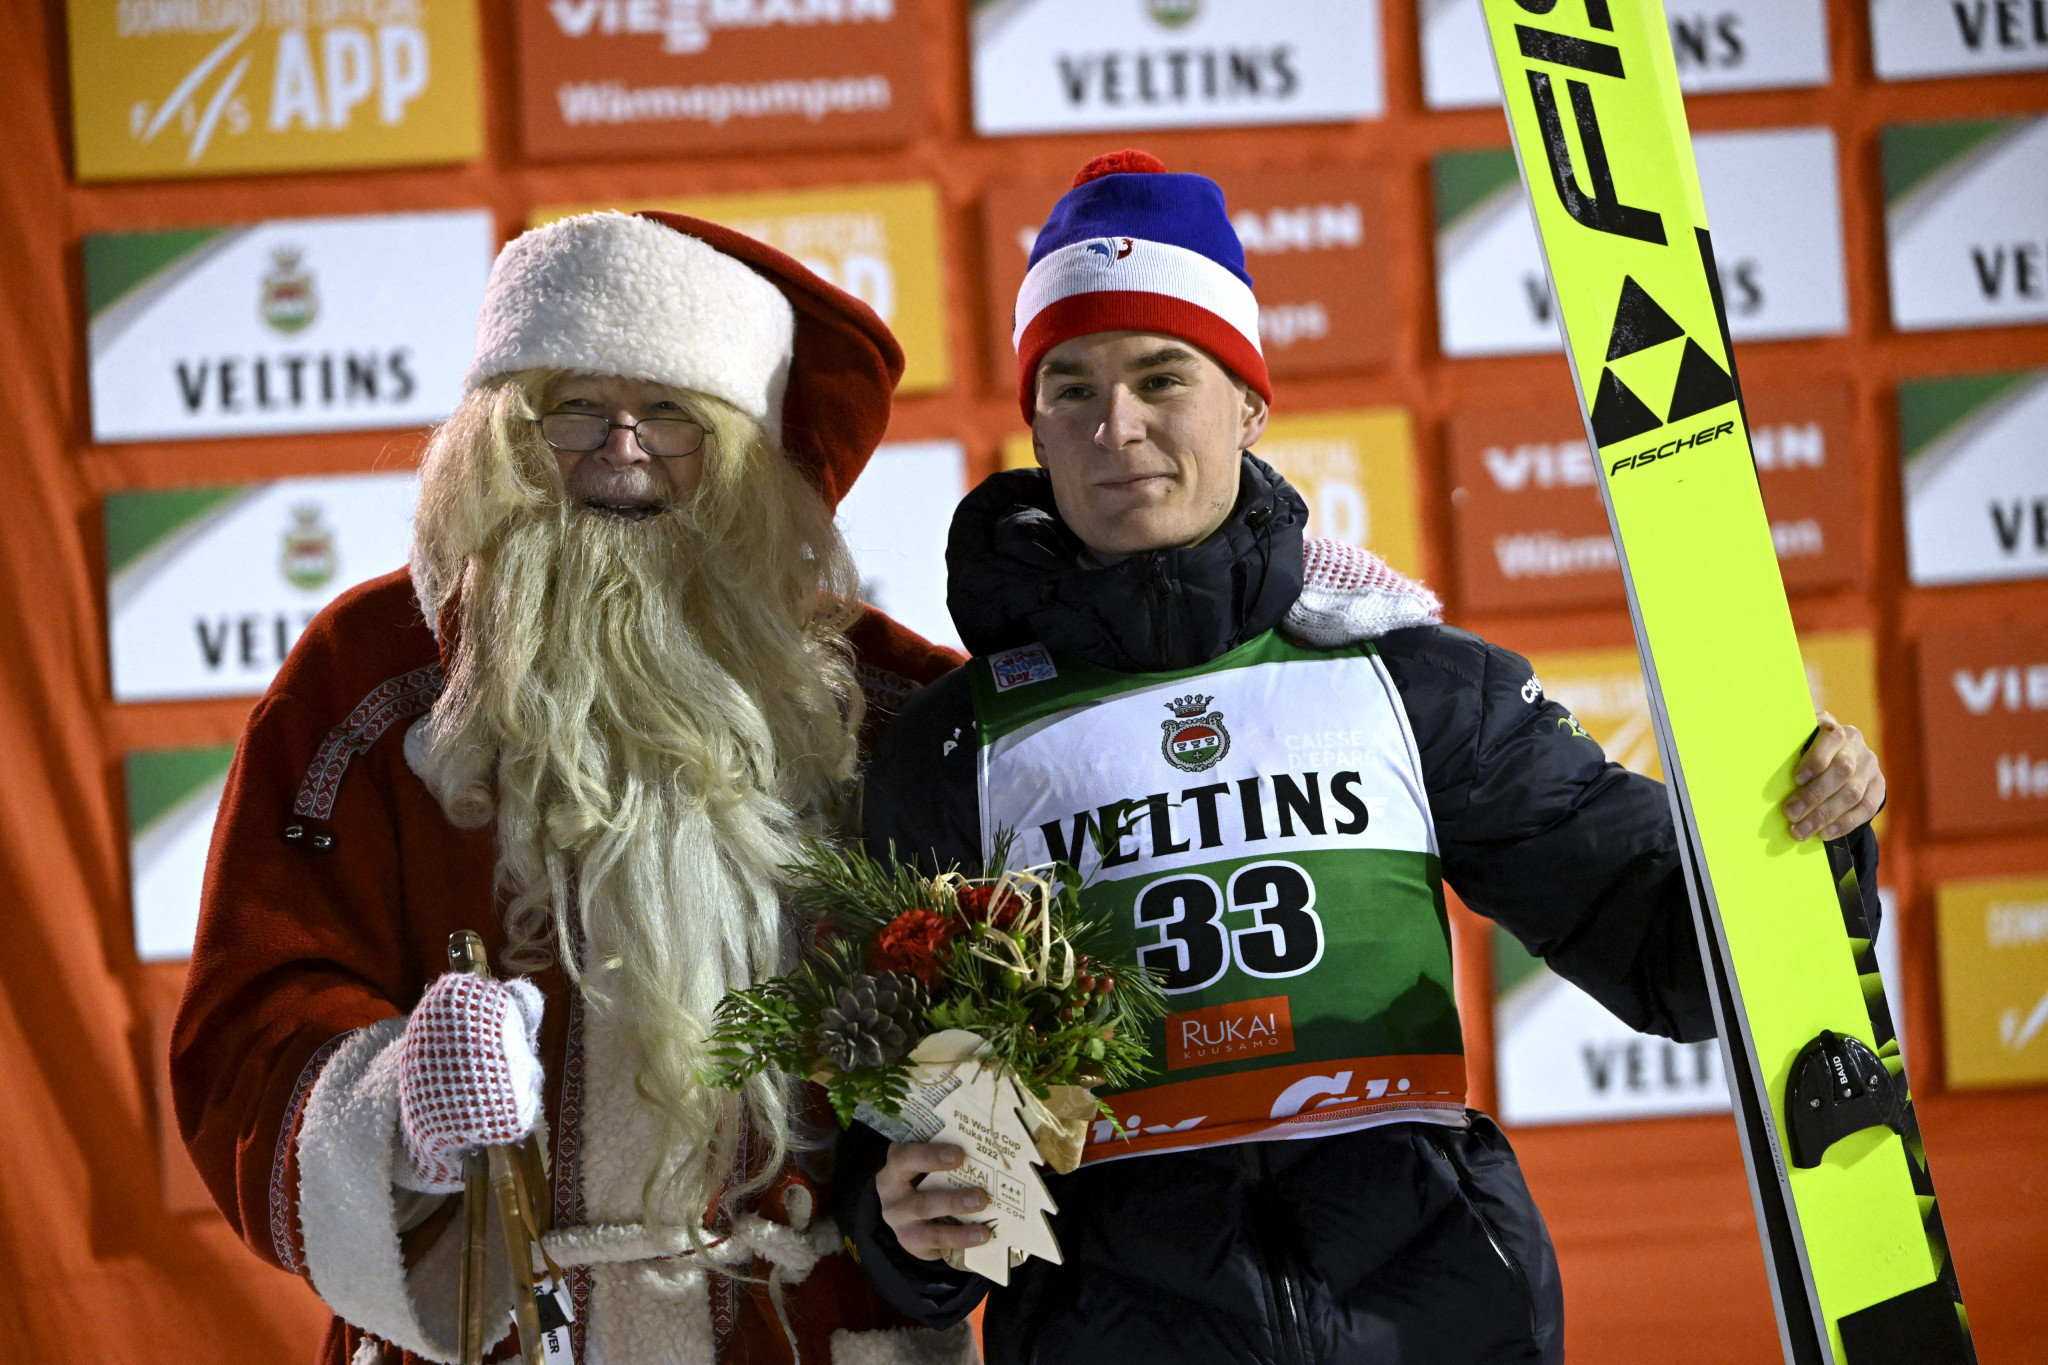 Matteo Baud, right, made a Nordic Combine World Cup podium for the first time ©Getty Images